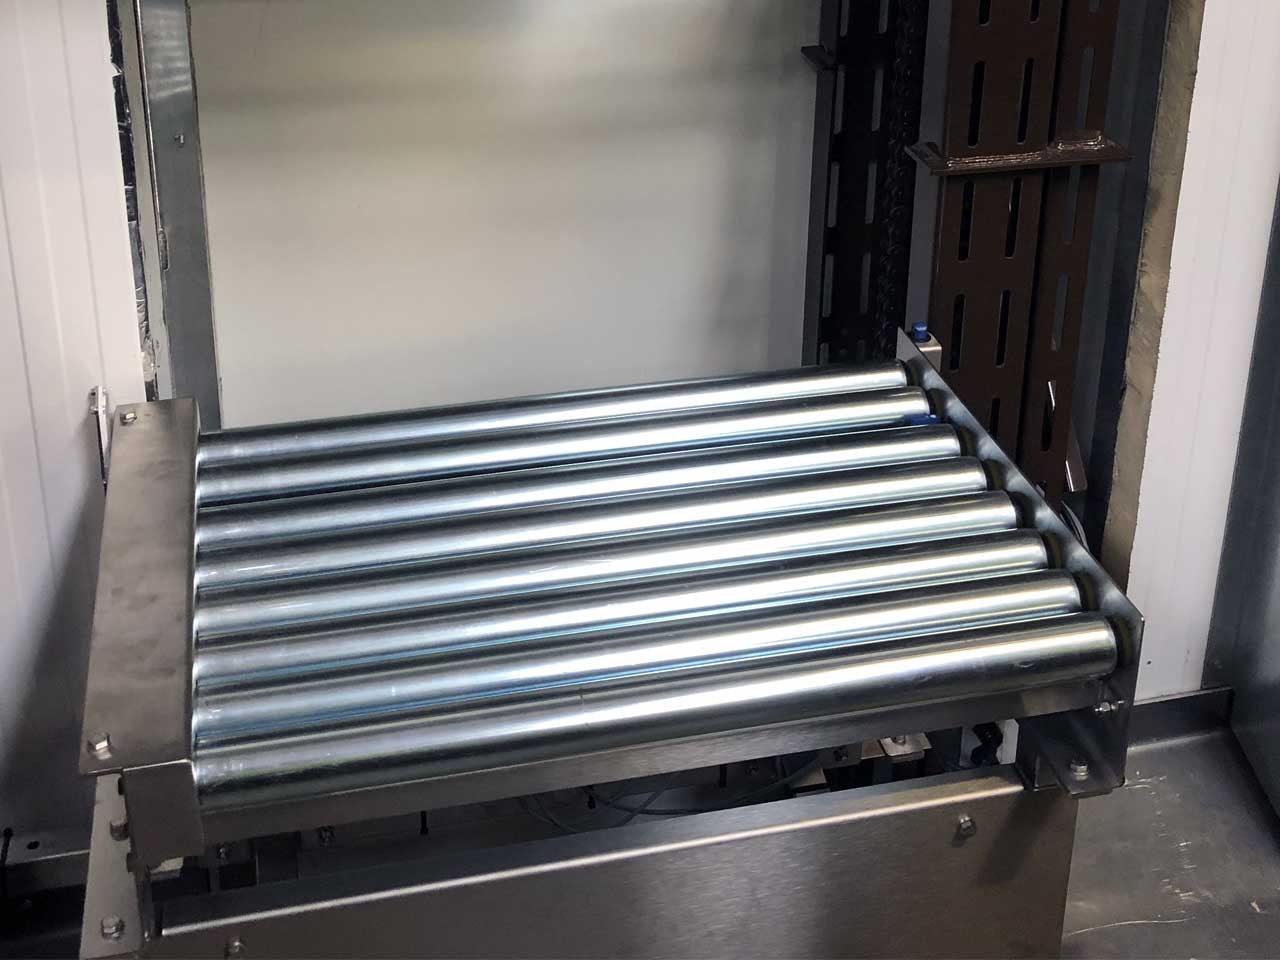 Suppliers of 24v Powered Roller Conveyor